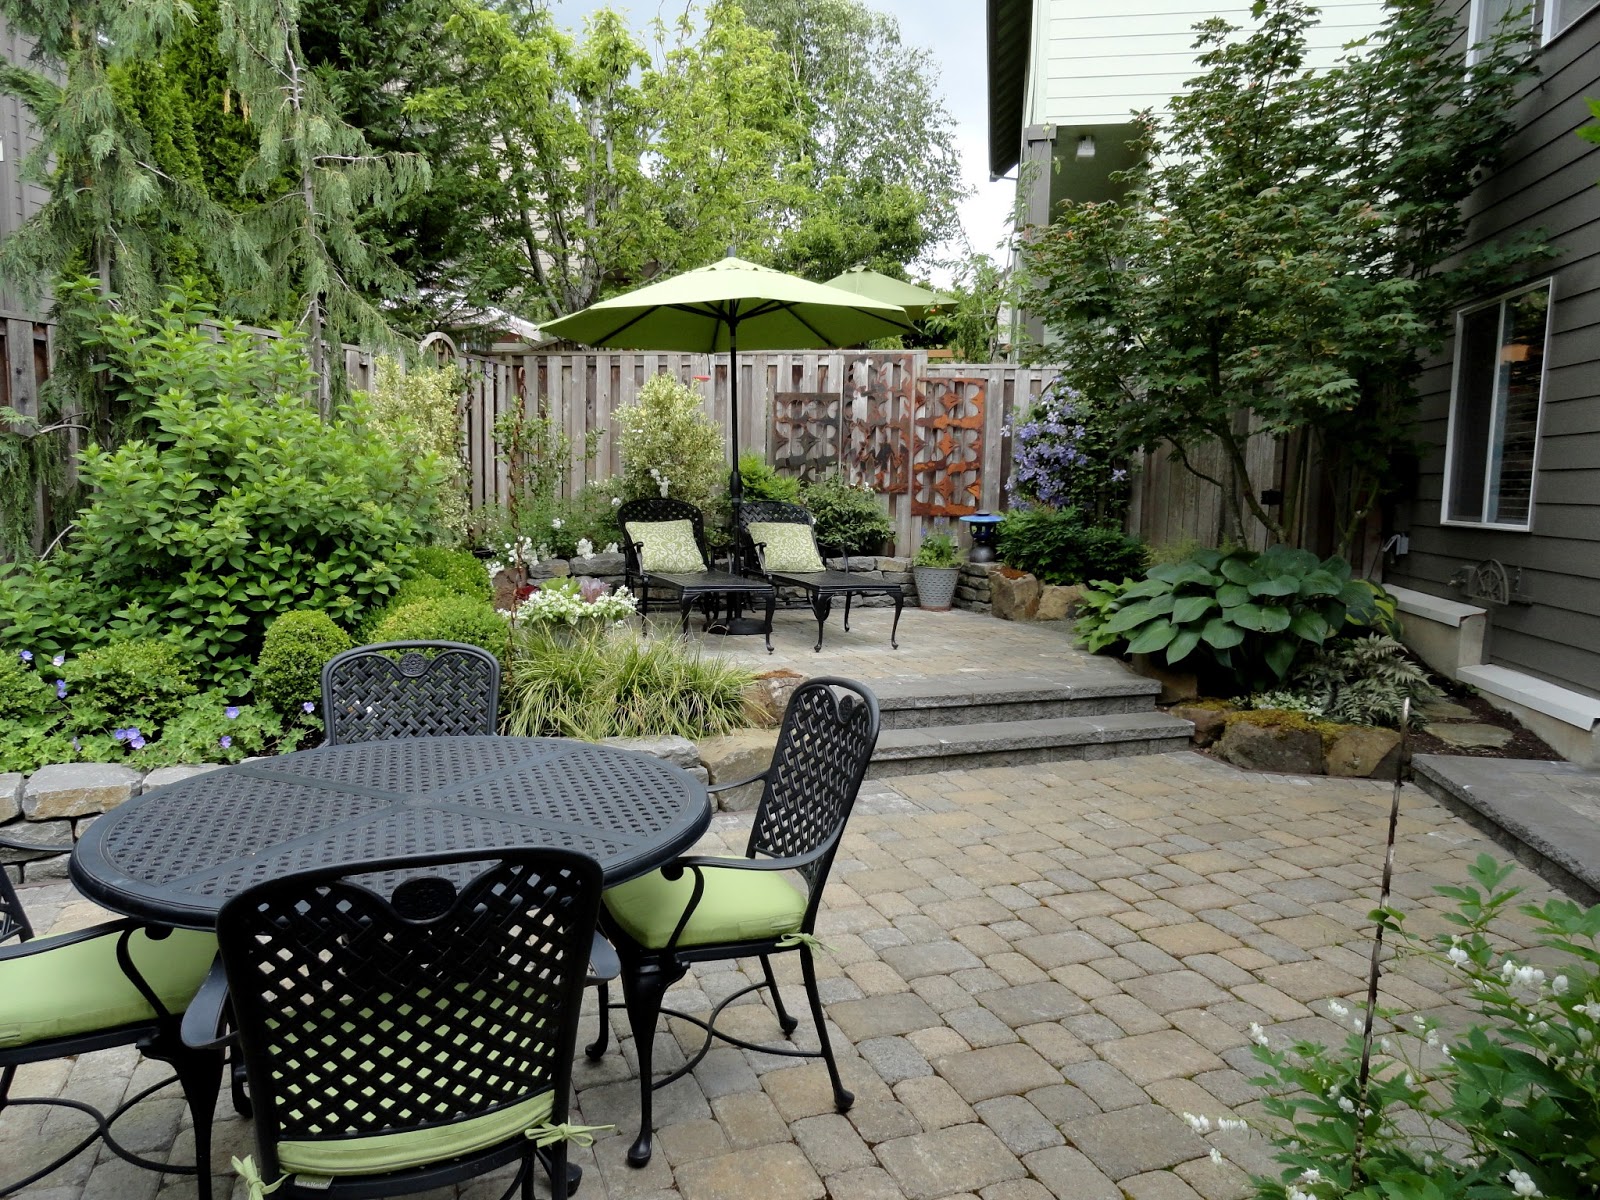 Creating A Private Backyard We Certainly Do Not Want To Create A